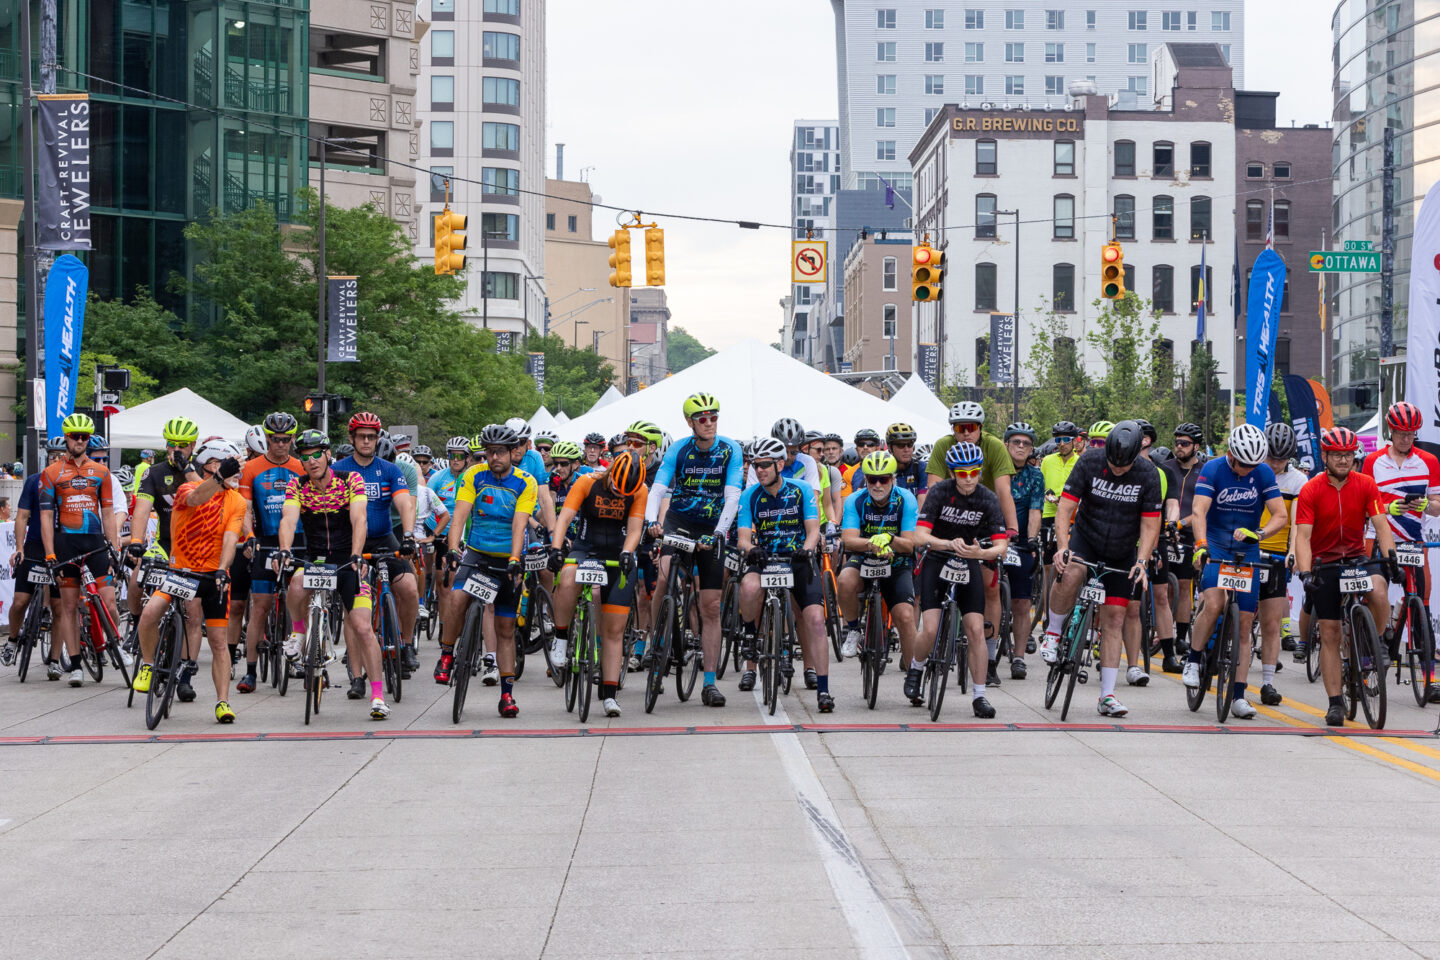 riders line up for the cycling event the Gran Fondo